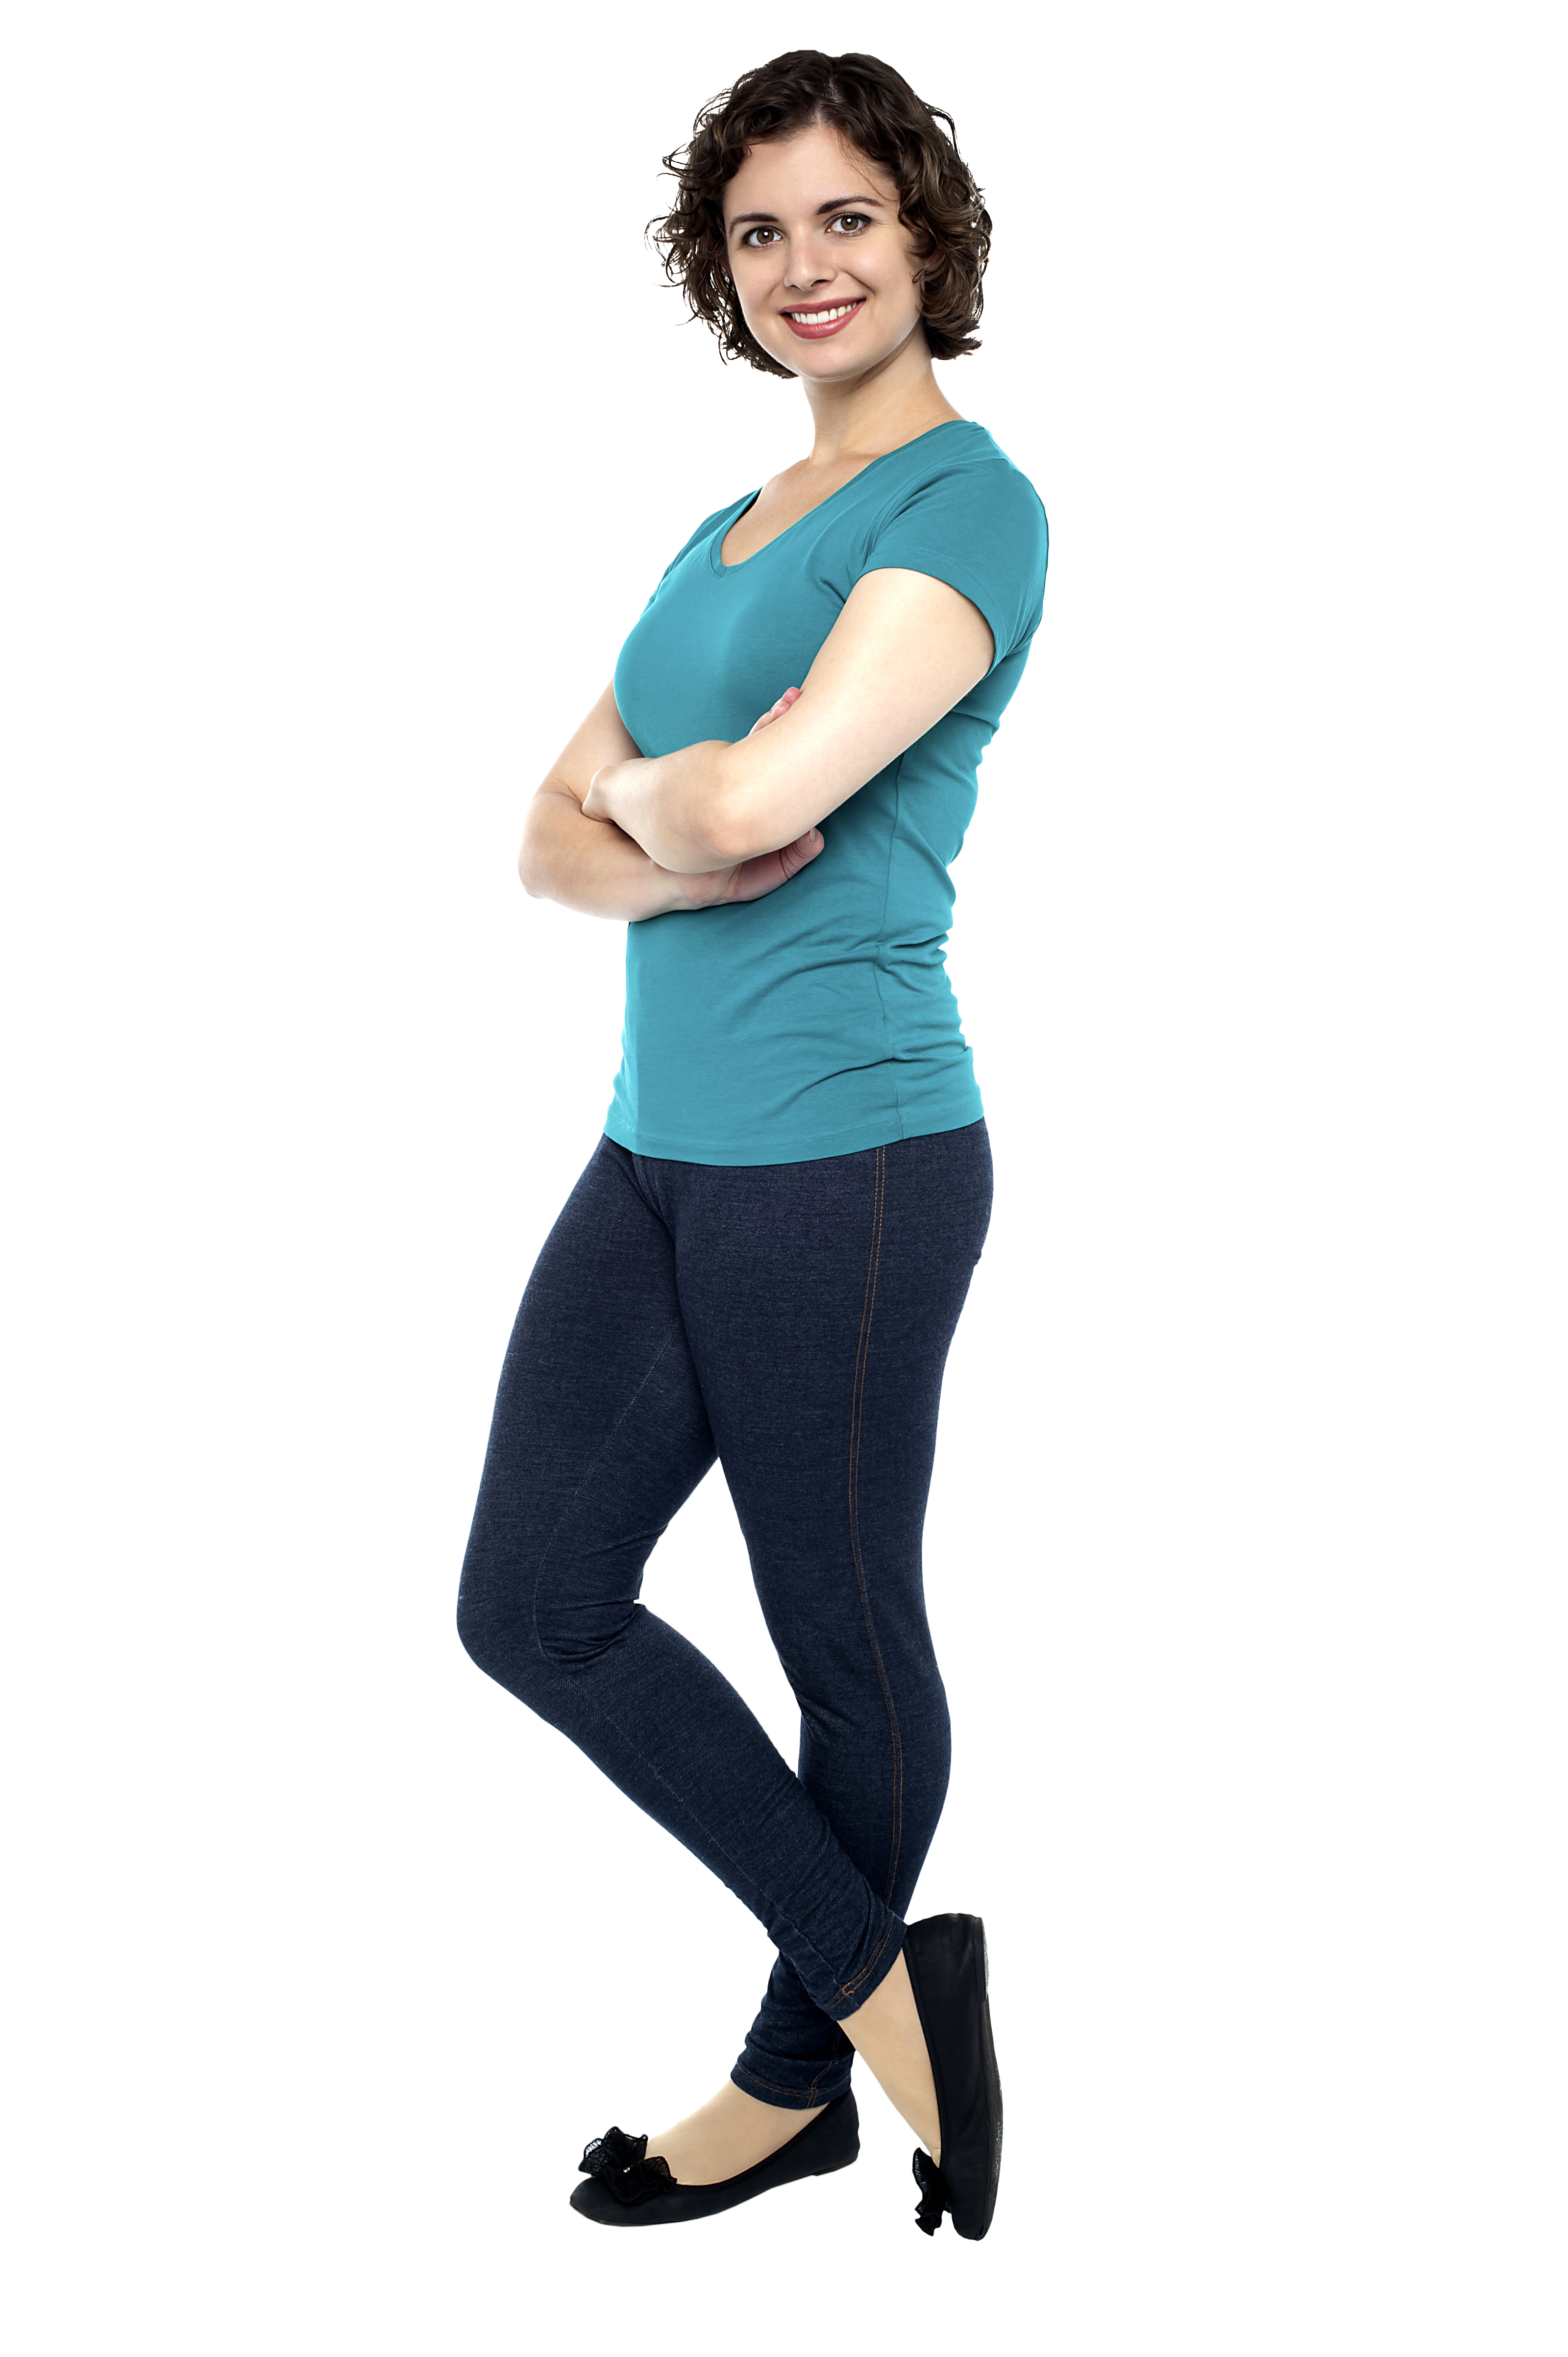 Download Standing Girl PNG Image for Free